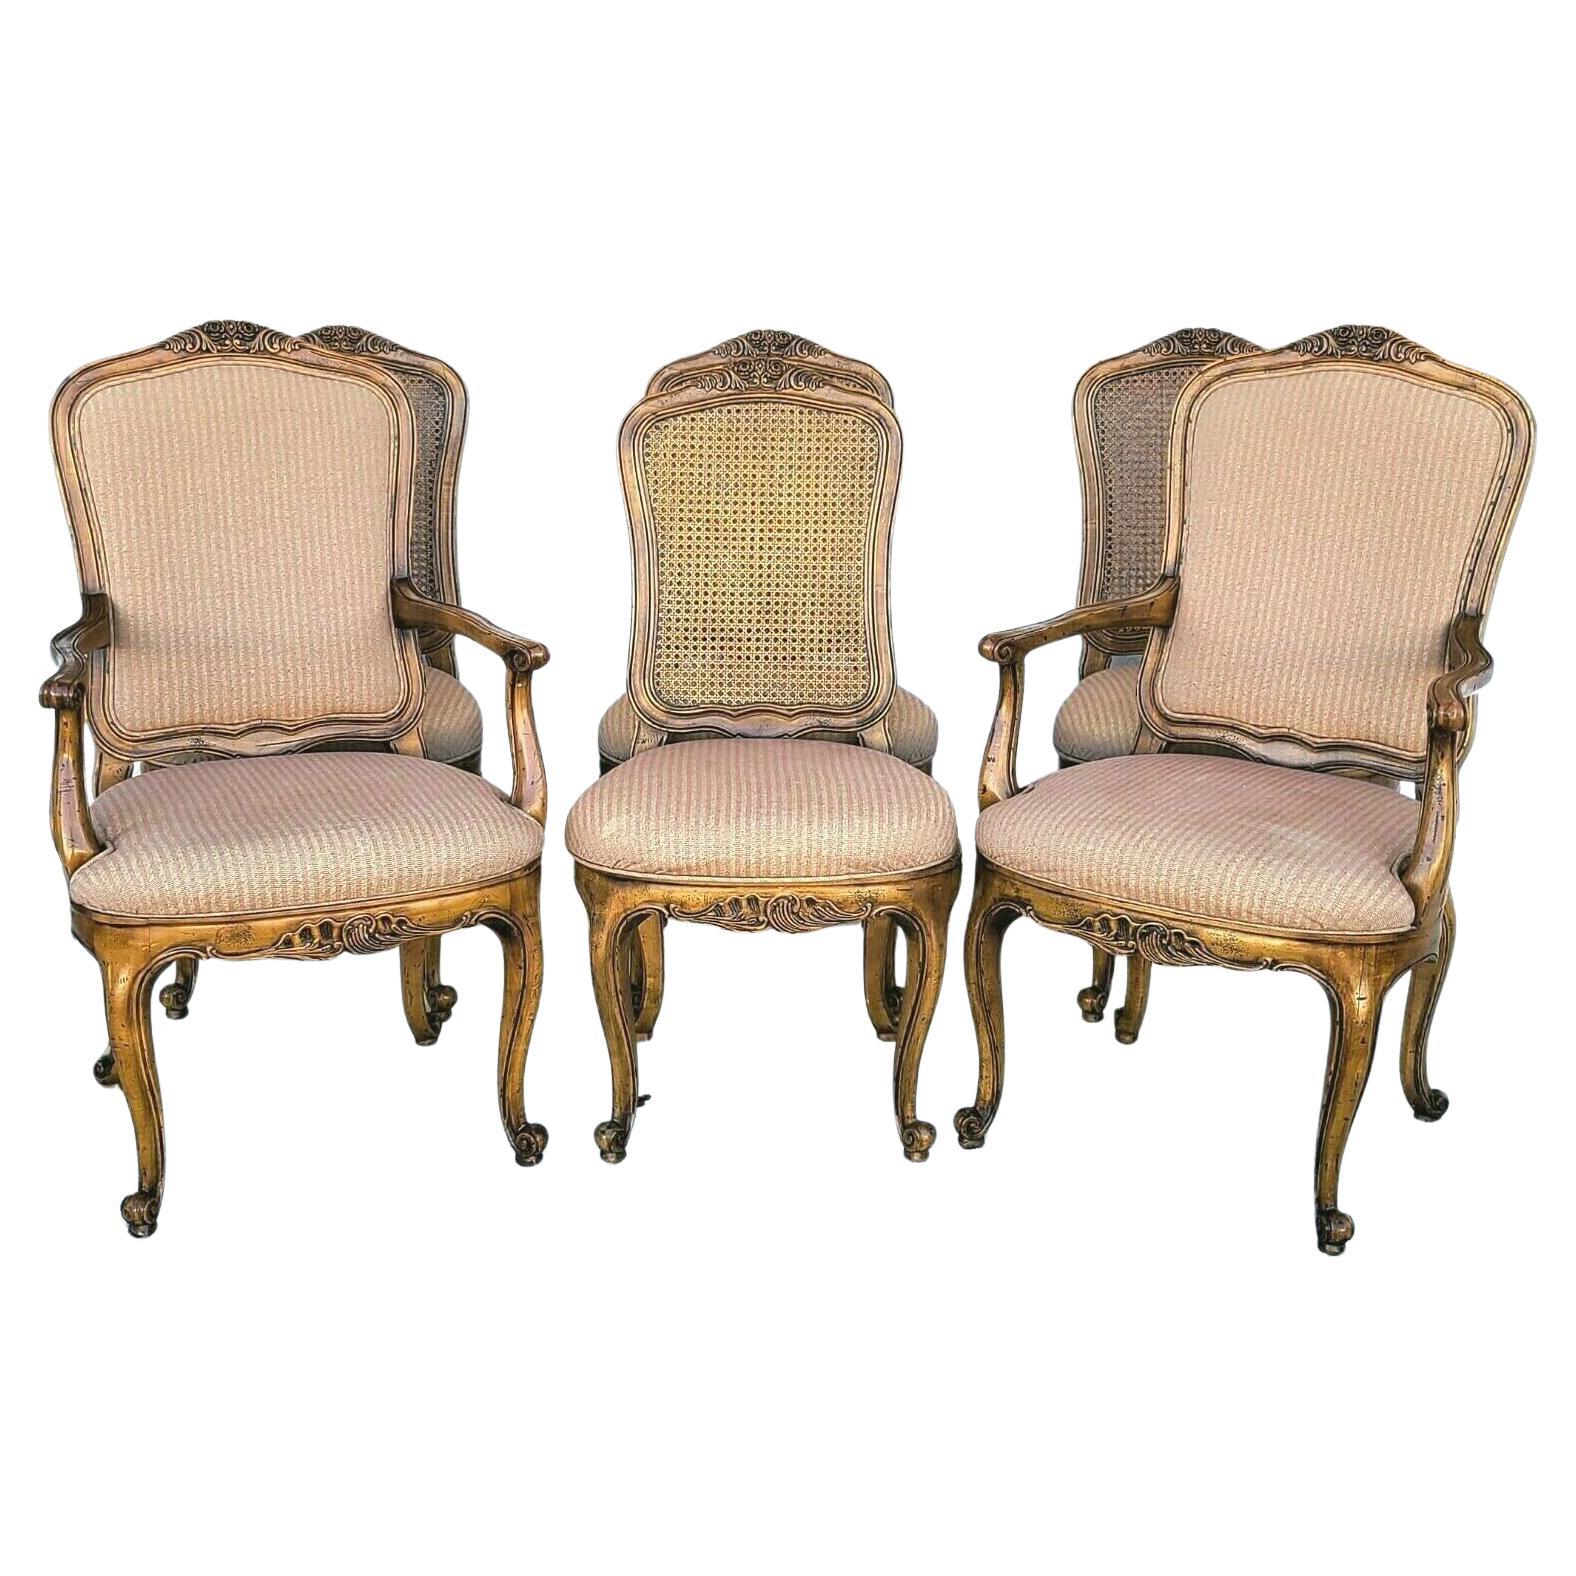 Henredon French Provincial Cane Back Dining Chairs, Set of 6